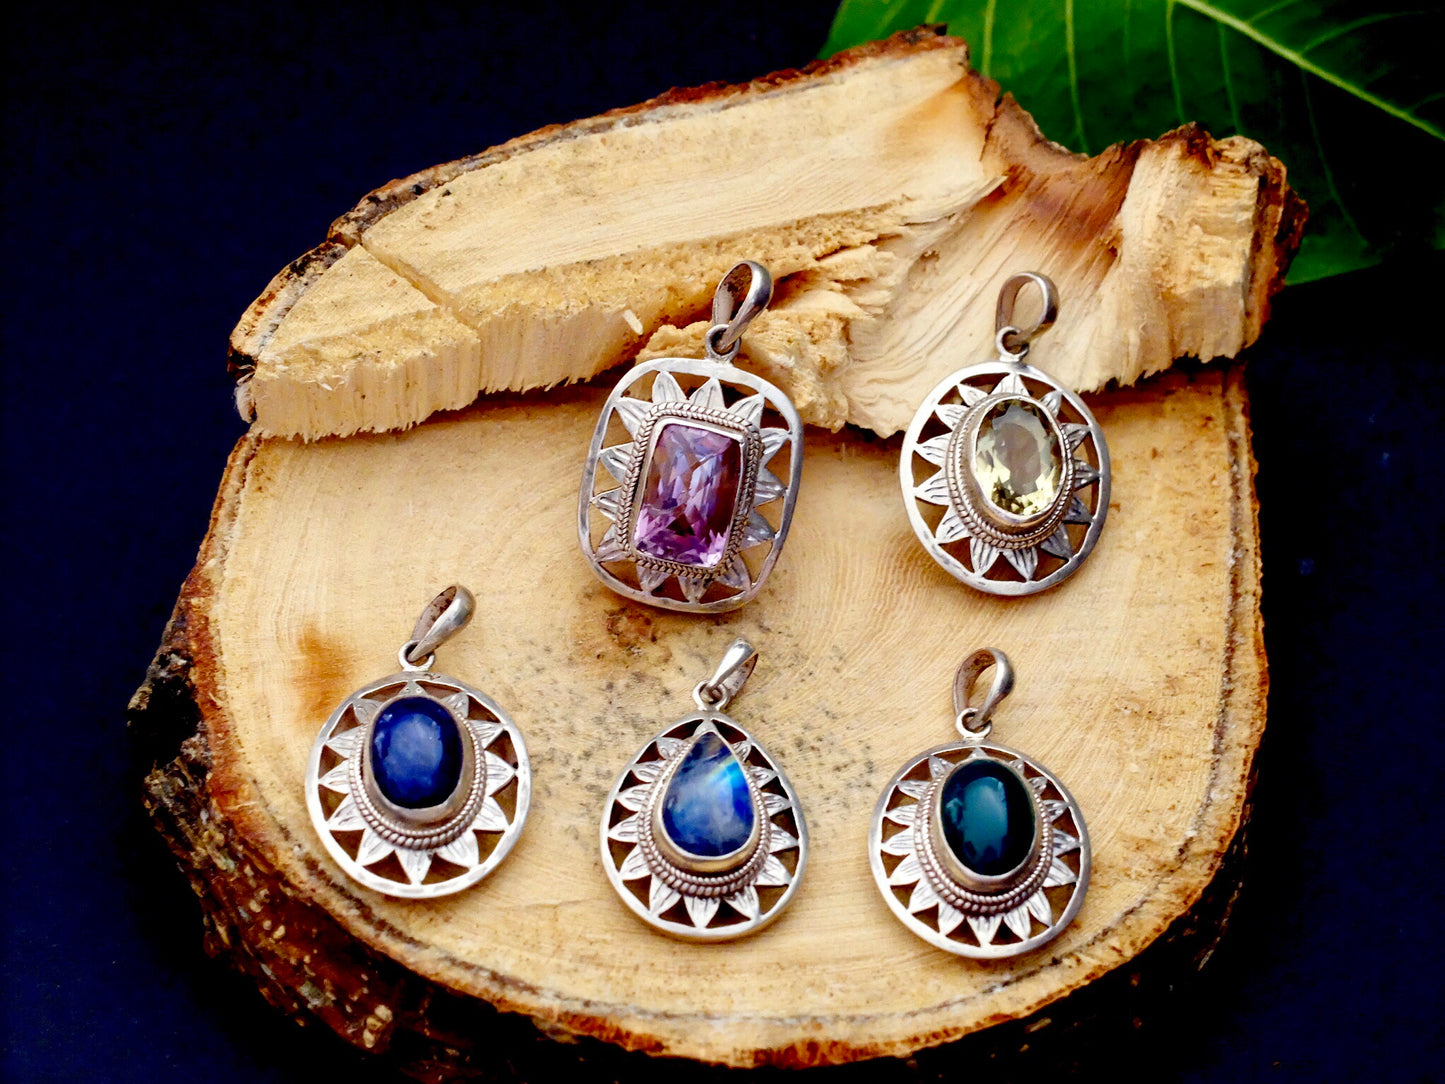 Gemstone and Sterling Silver Pendant